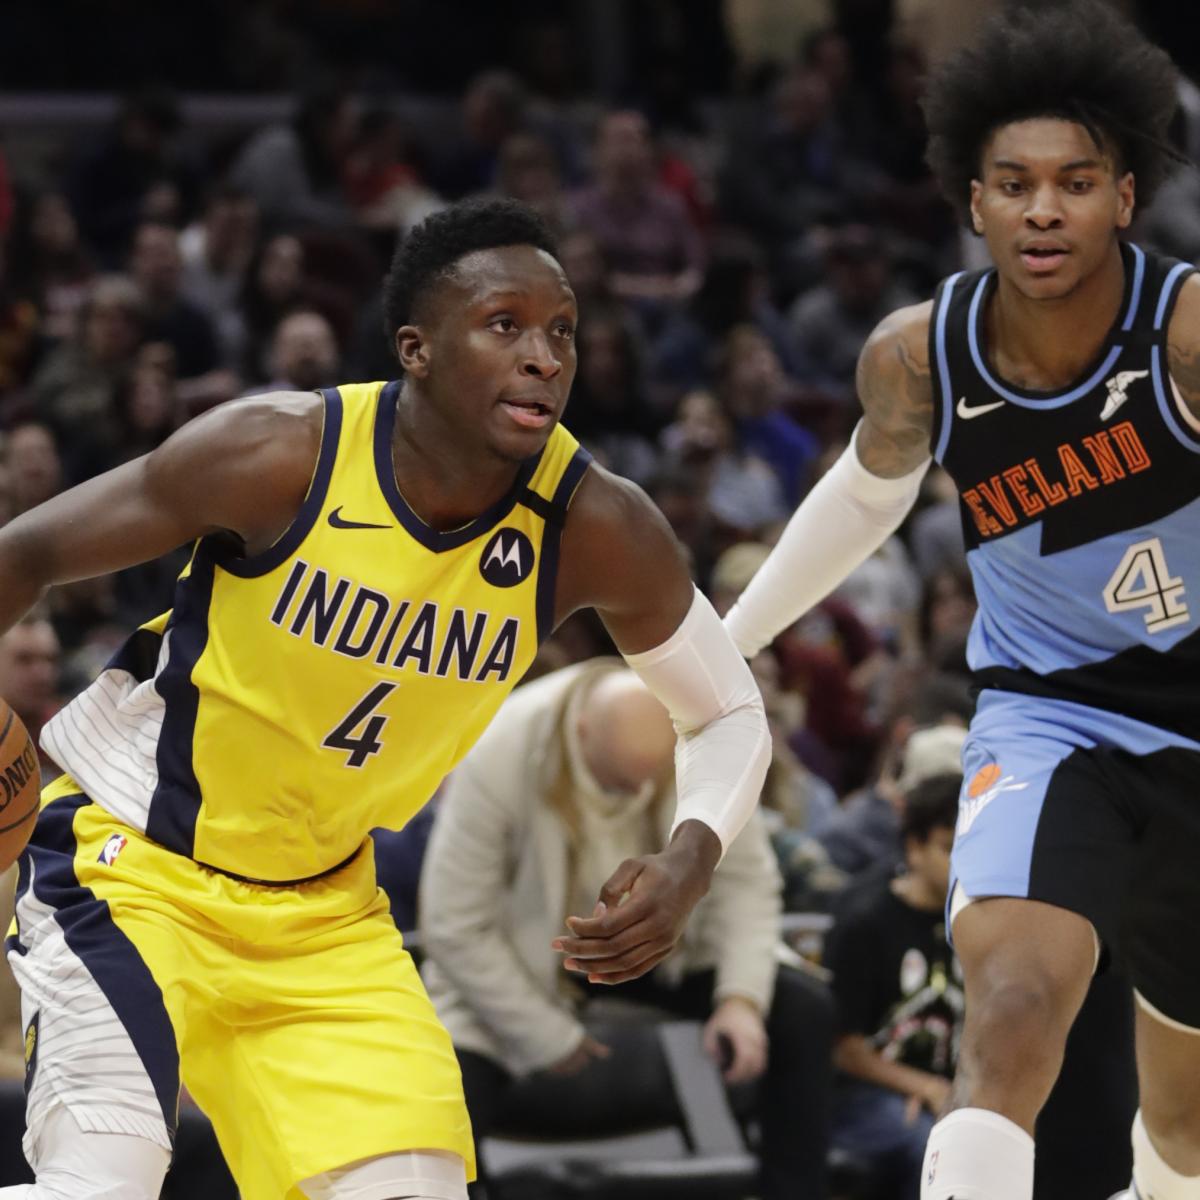 Report: Pacers’ Victor Oladipo Concerned about $3M Contract Dispute Amid Quad Hurt